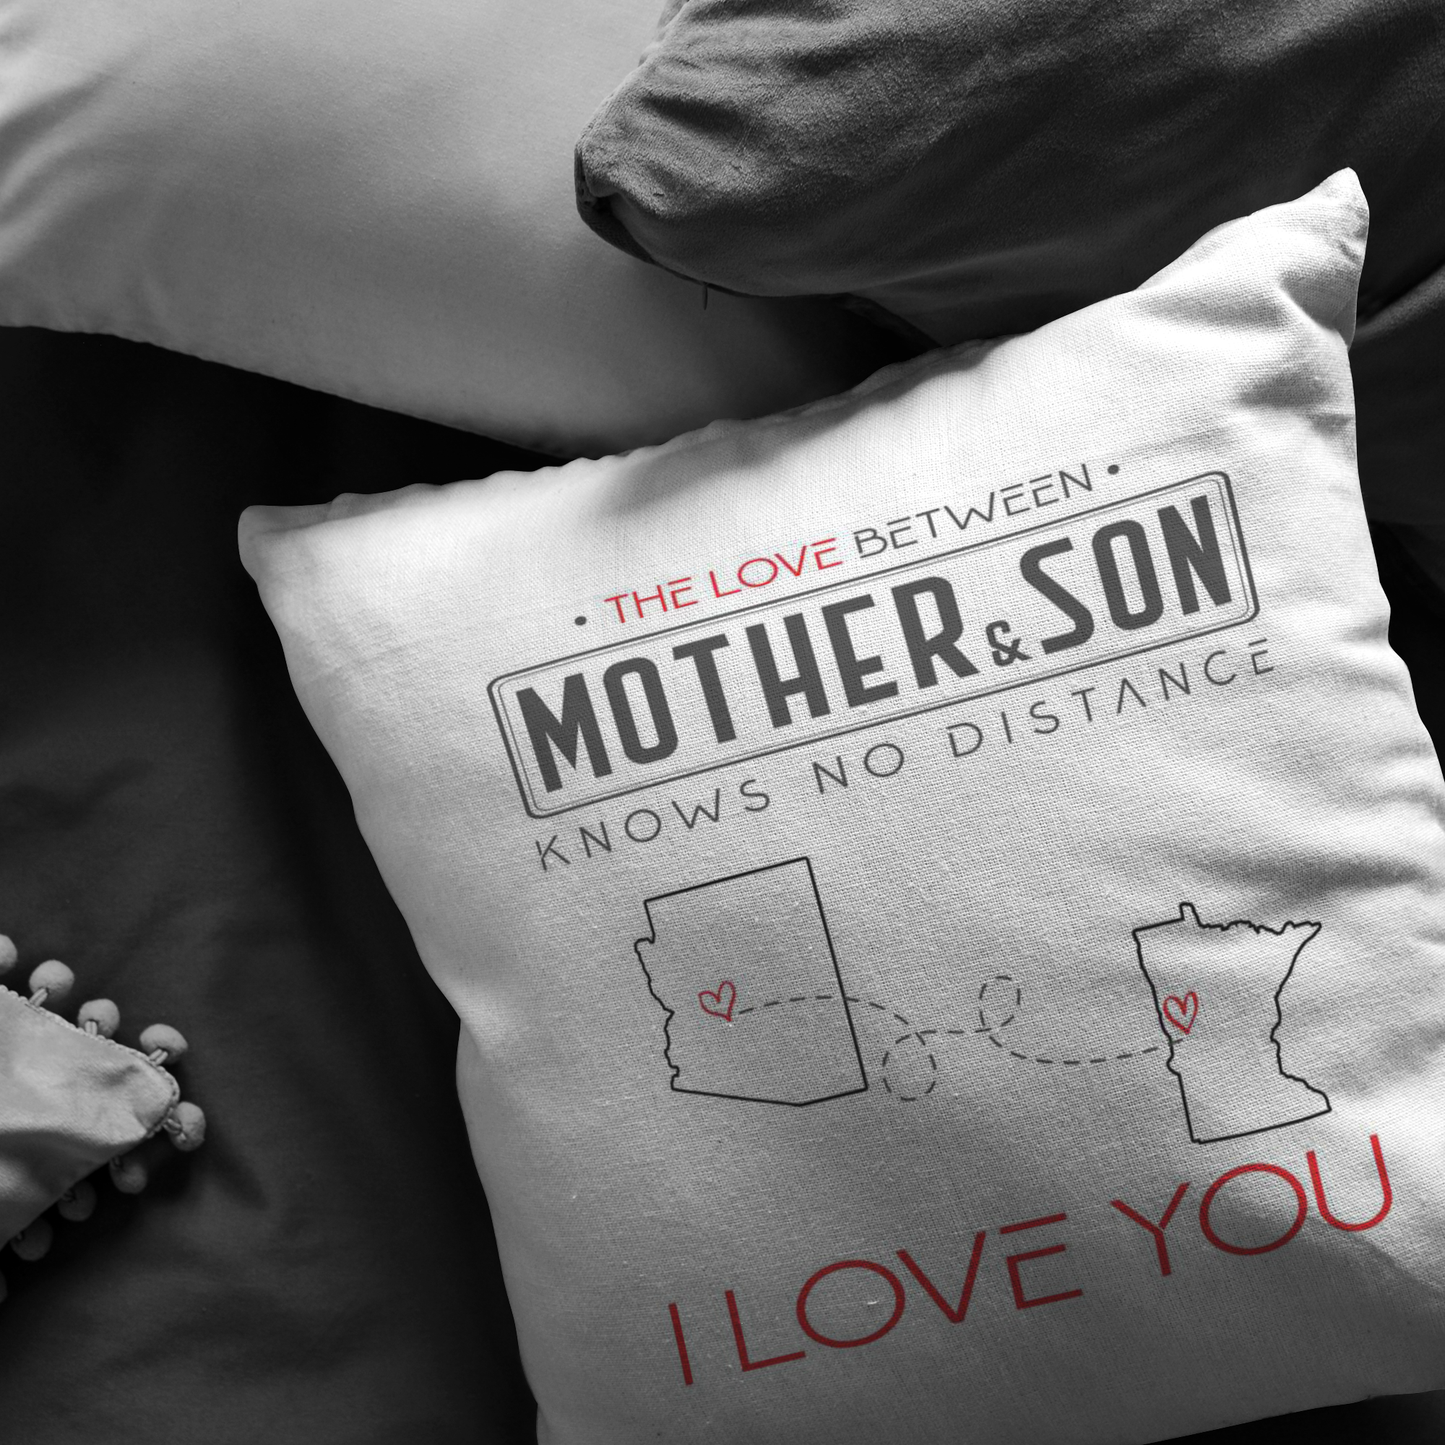 ND-pl20419630-sp-22989 - Mothers Day Gifts For Mom - The Love Between Mother  Son K